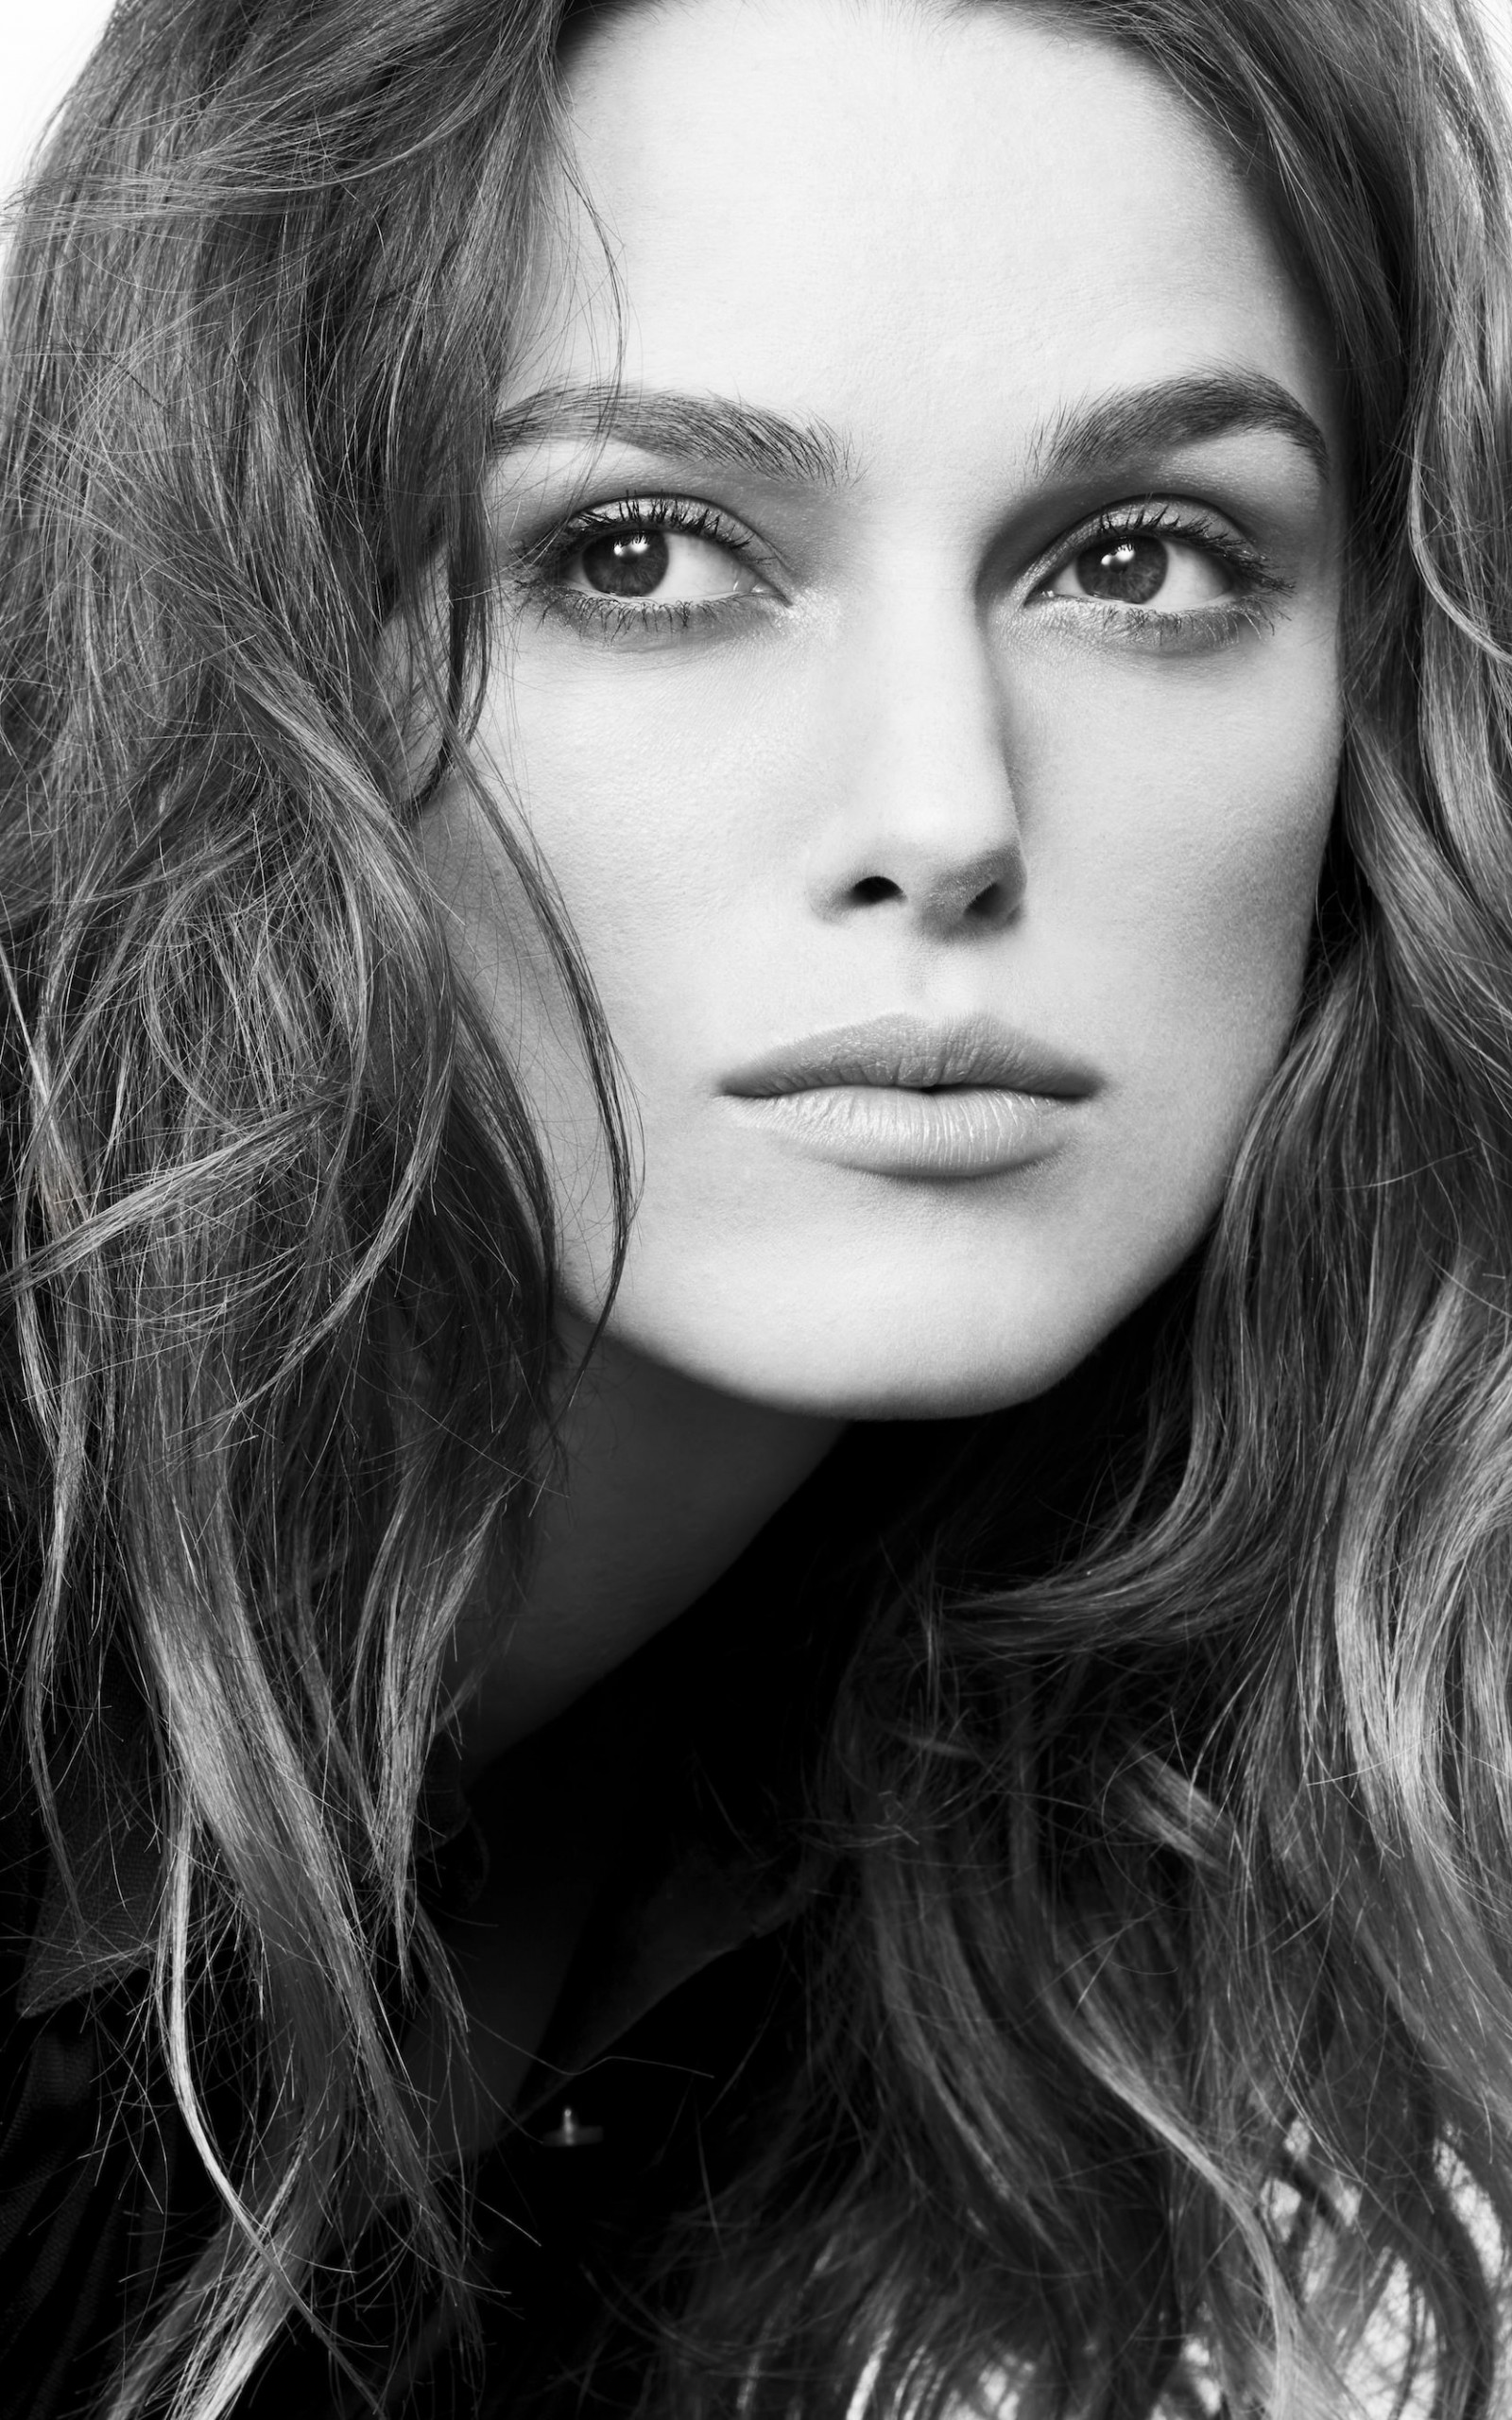 Keira Knightley in Black & White Wallpaper for Amazon Kindle Fire HDX 8.9